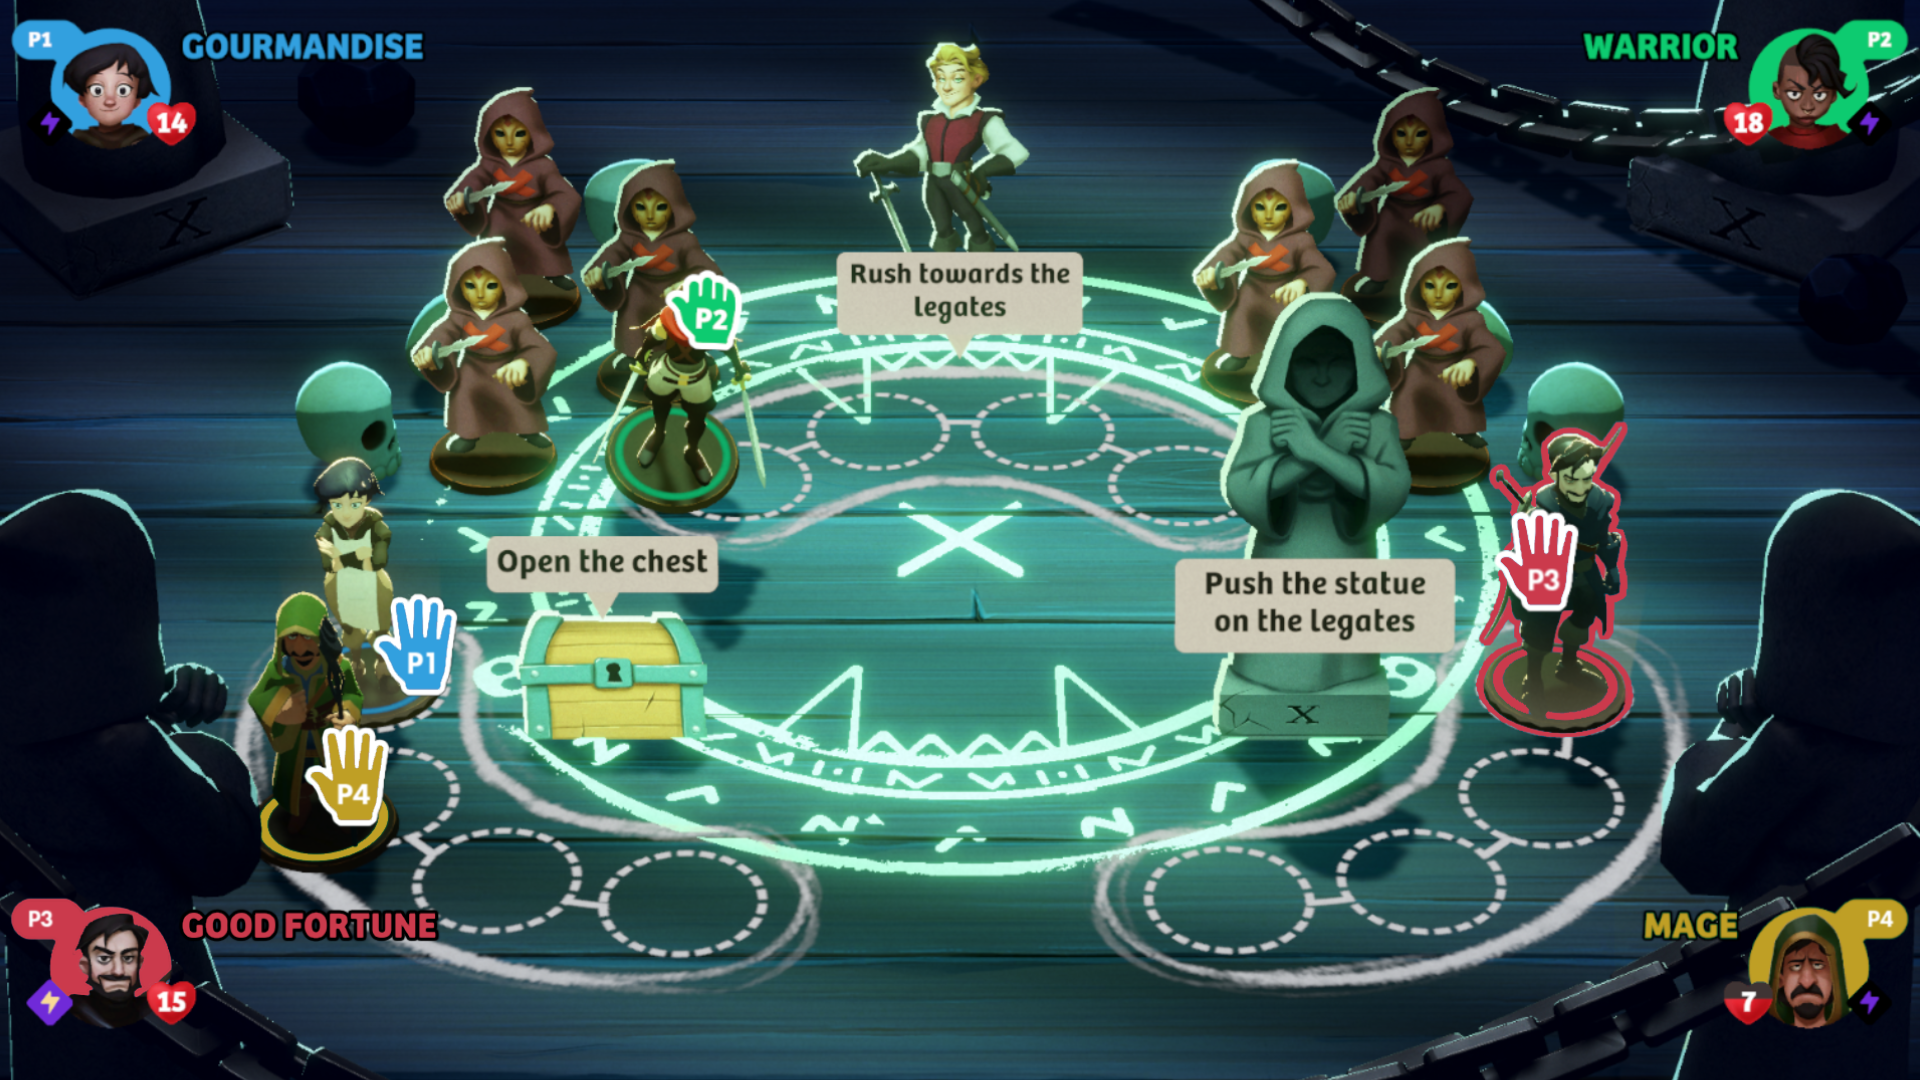 Choice scene in the sacrifice scene. The four heroes must choose between: Rush towards the legates, Push the statue on them or Open the chest.